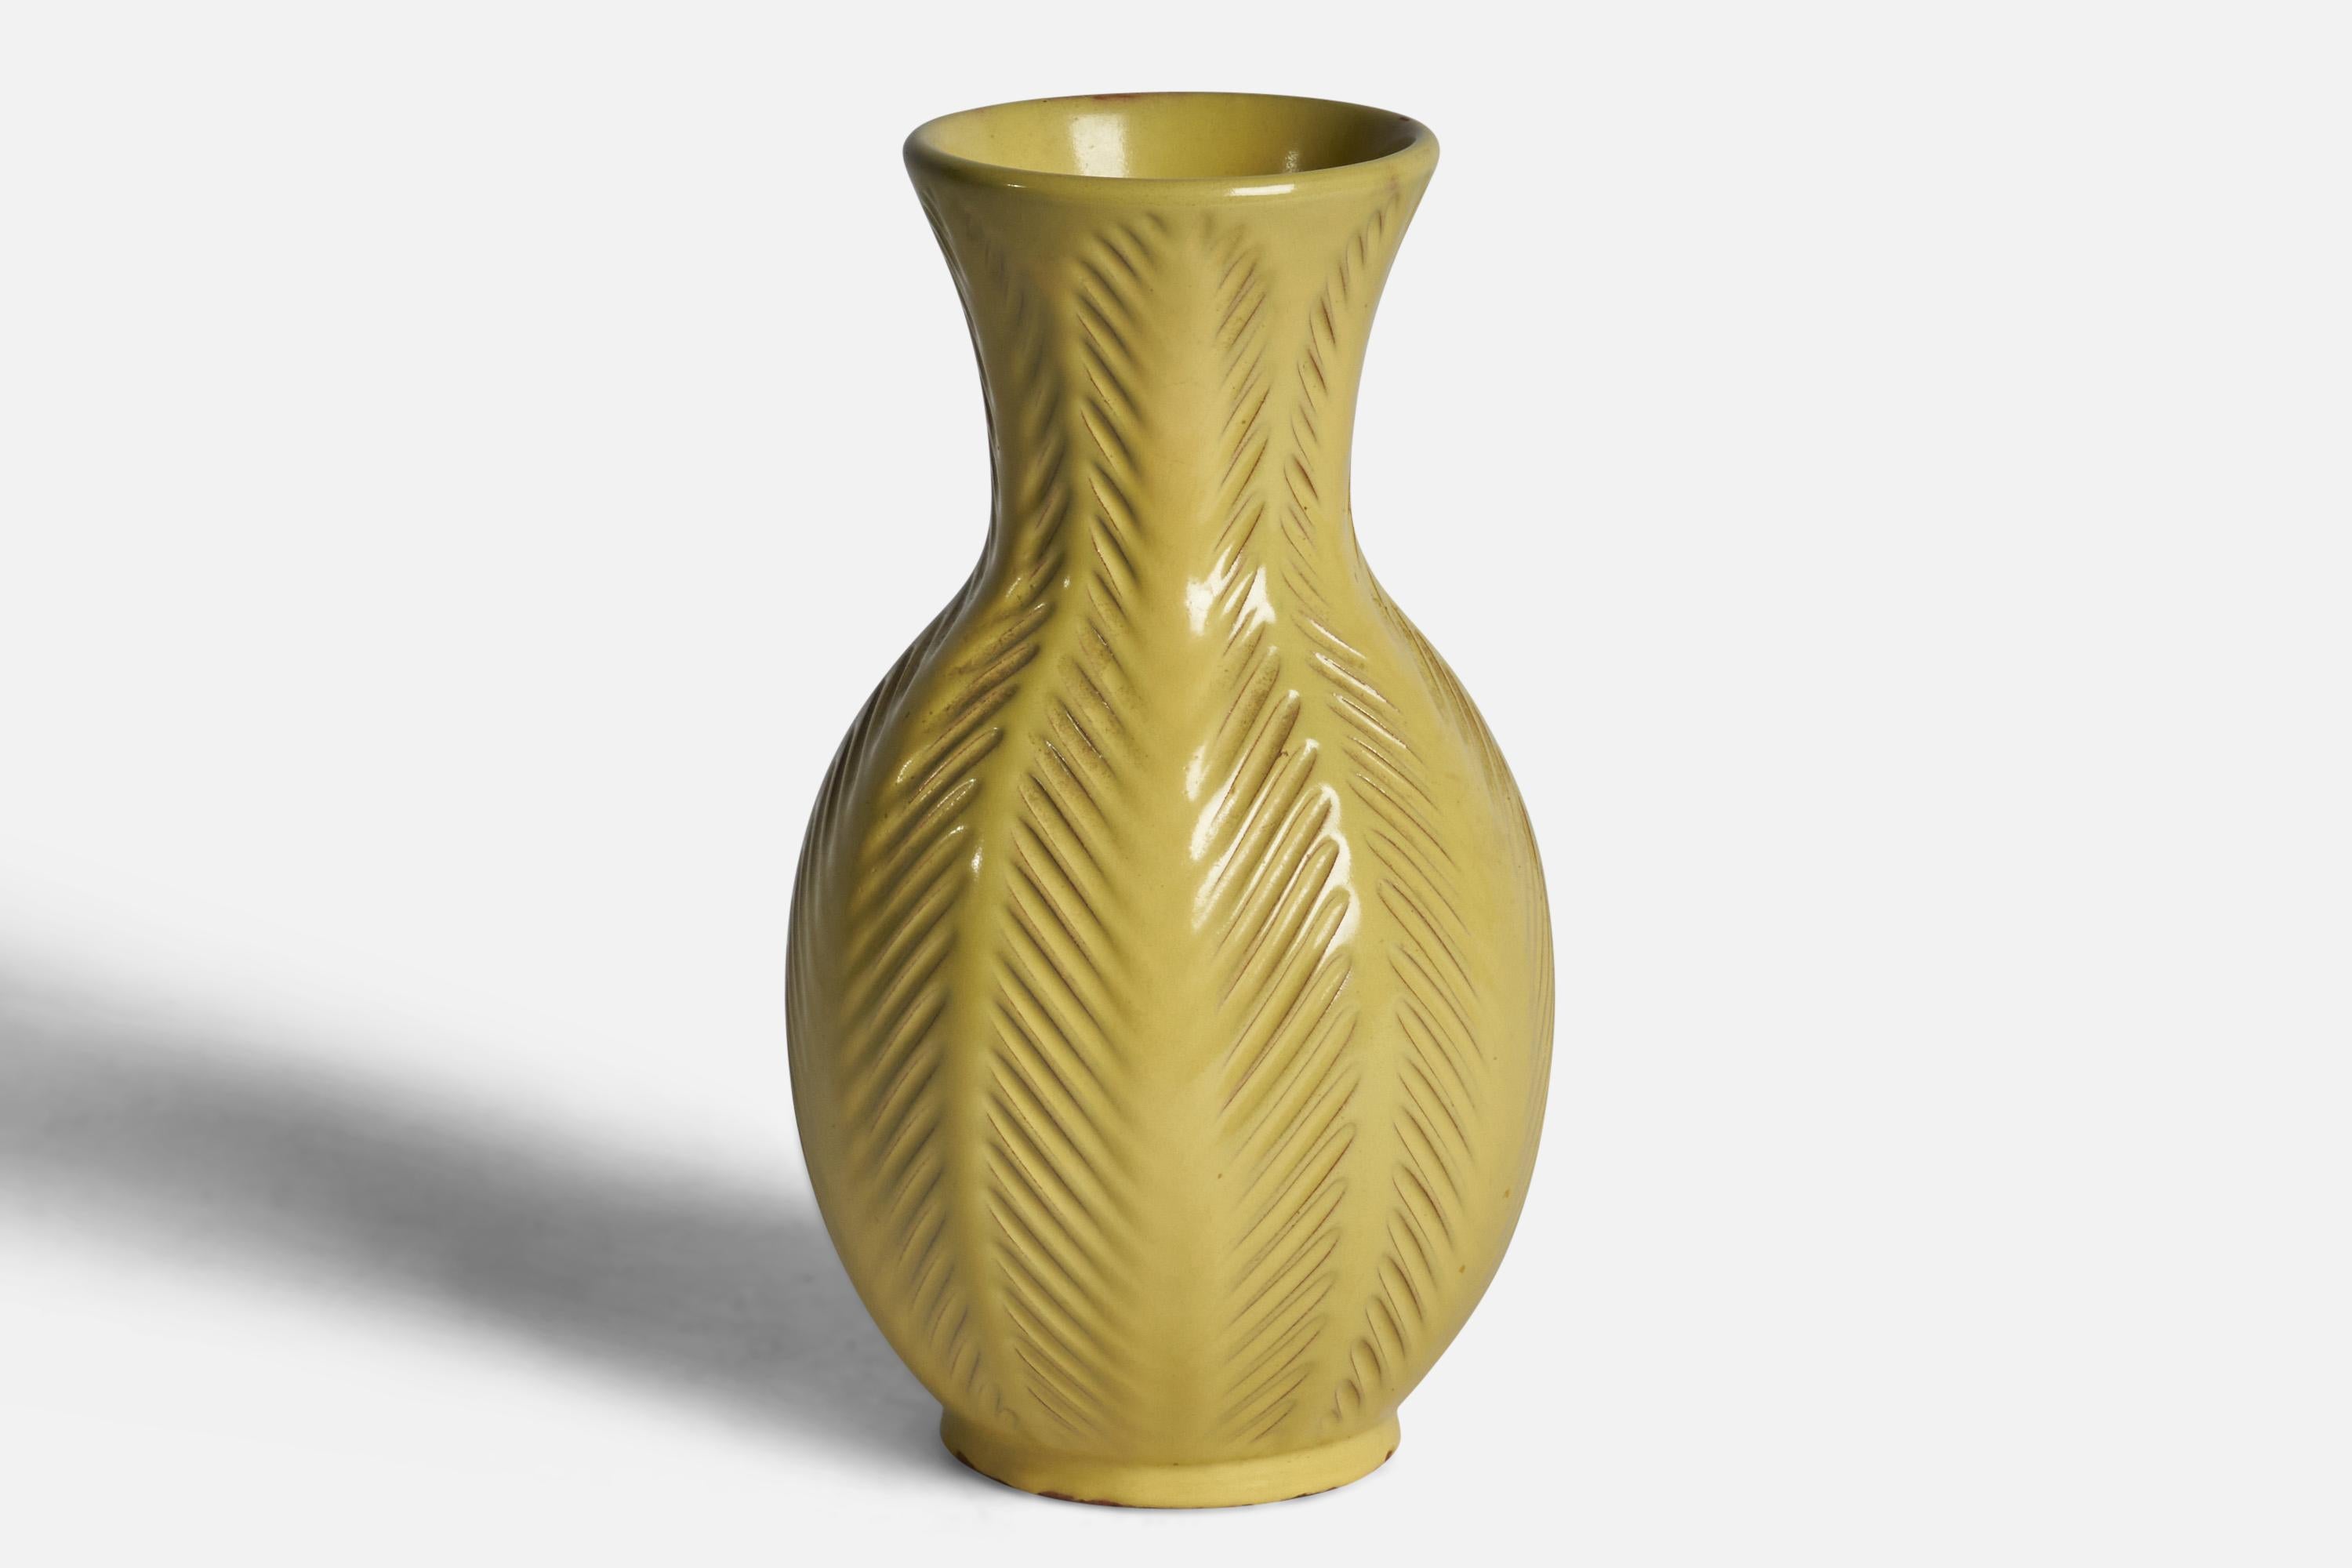 A yellow-glazed incised earthenware vase designed by Anna-Lisa Thomson and produced by Upsala Ekeby, Sweden, 1930s.